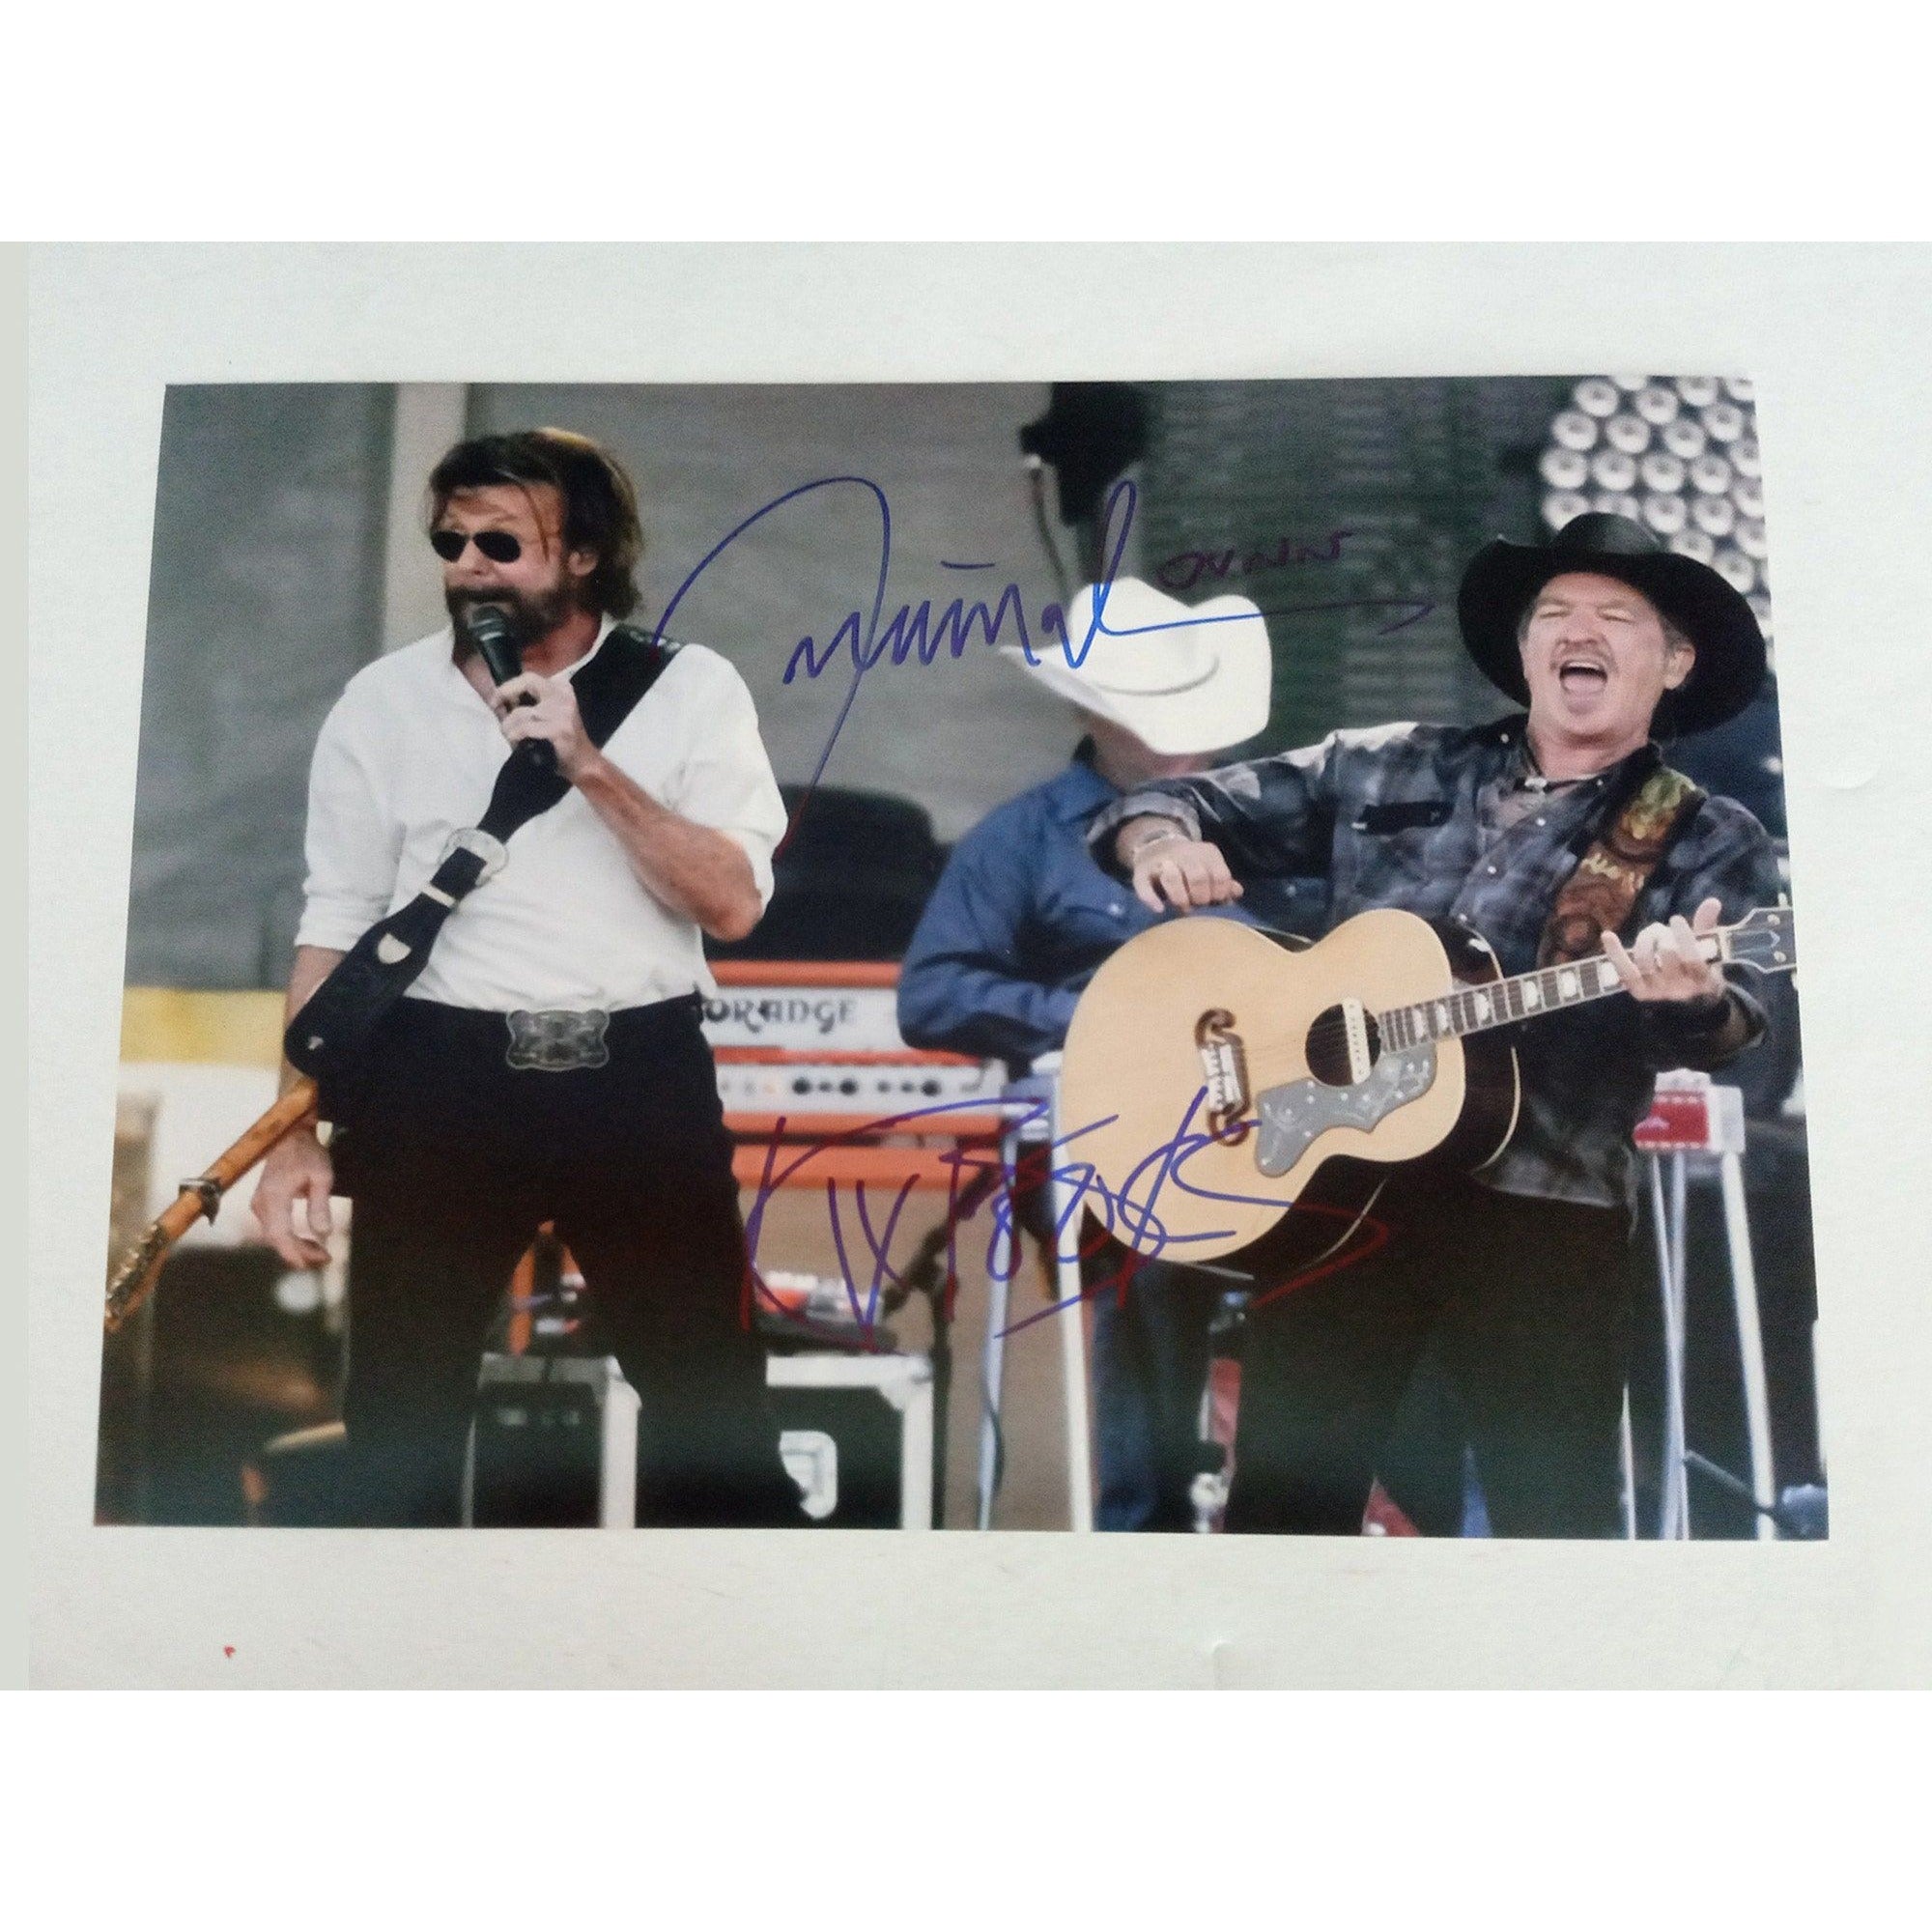 Ronnie Brooks and Kix Dunn 8 by 10 signed photo with proof